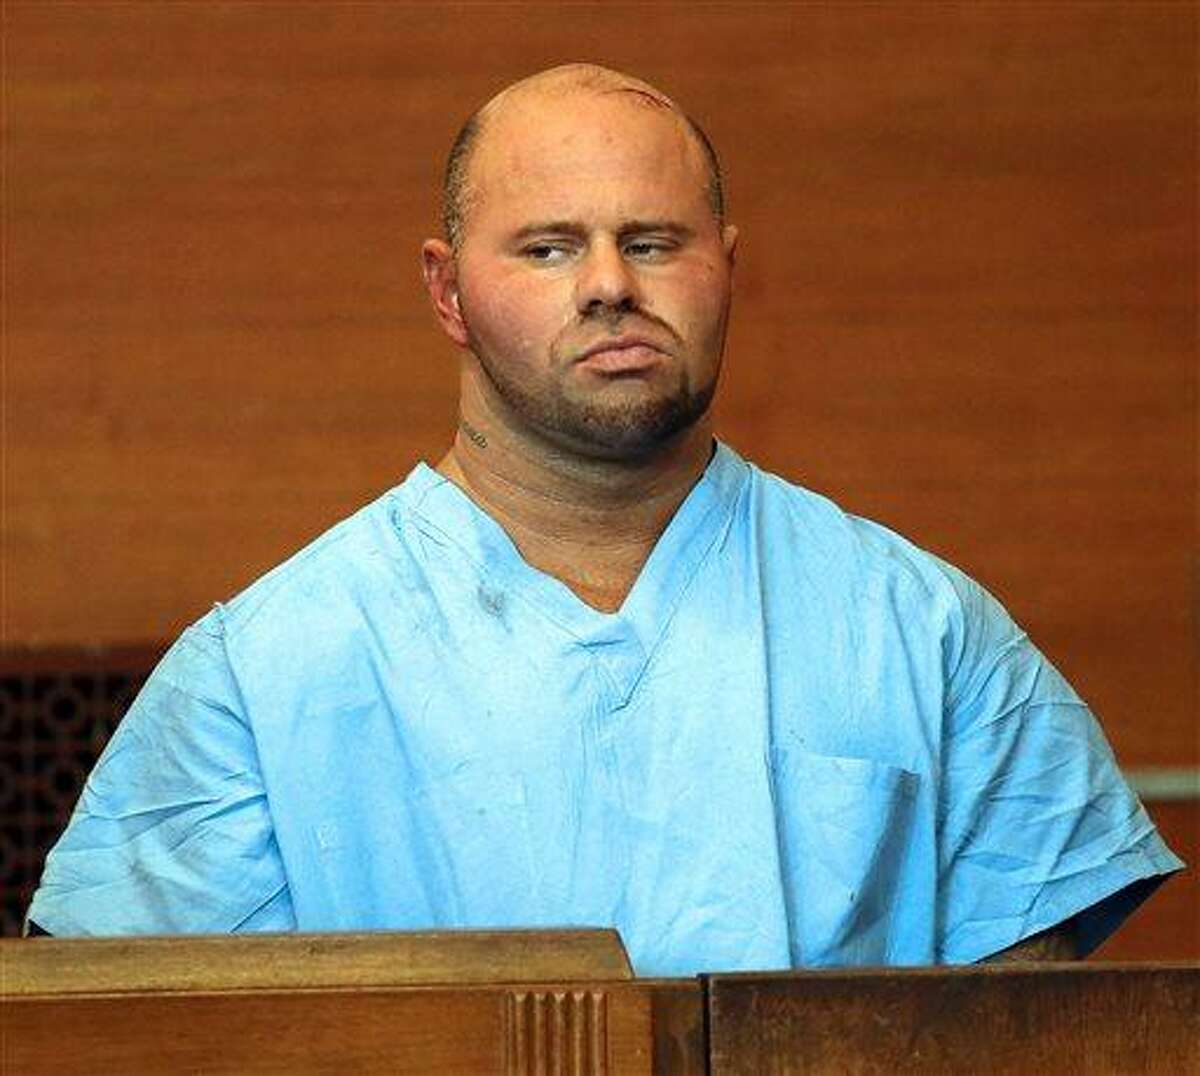 Jared Remy appears at Waltham District Court for his arraignment, Friday, Aug. 16, 2013, in Waltham, Mass., on domestic assault and battery charges in connection with the death of 27-year-old Jennifer Martel. Remy, the son of longtime Boston Red Sox broadcaster Jerry Remy, is being held without bail after pleading not guilty to a charge of murder stemming from allegations that he fatally stabbed his girlfriend at his home. (AP Photo/The Boston Herald, Mark Garfinkel)